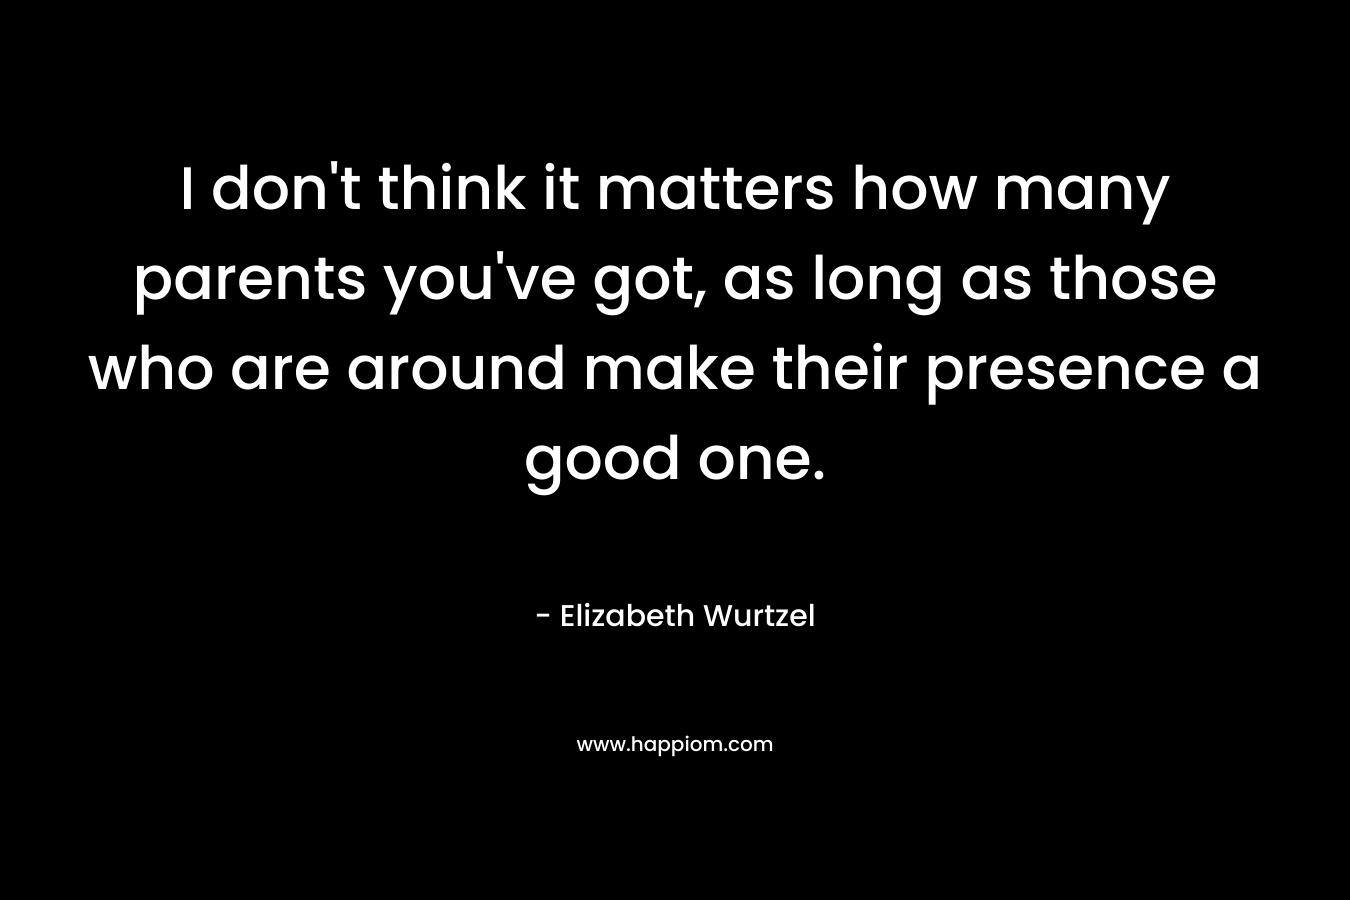 I don’t think it matters how many parents you’ve got, as long as those who are around make their presence a good one. – Elizabeth Wurtzel